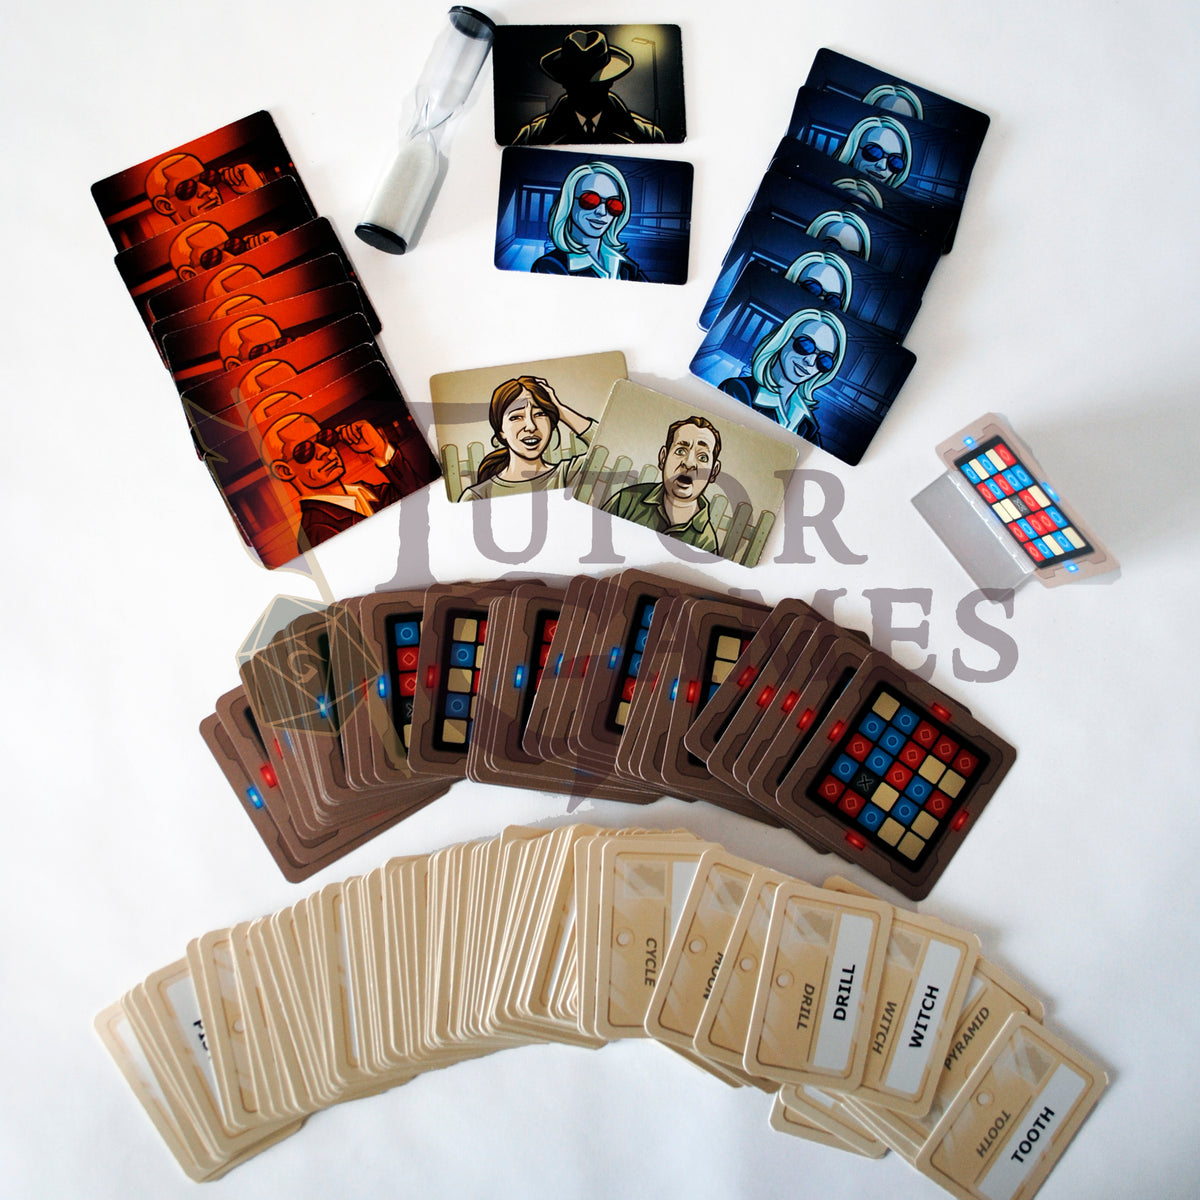 Codenames Pictures Edition Board Game, by Czech Games 